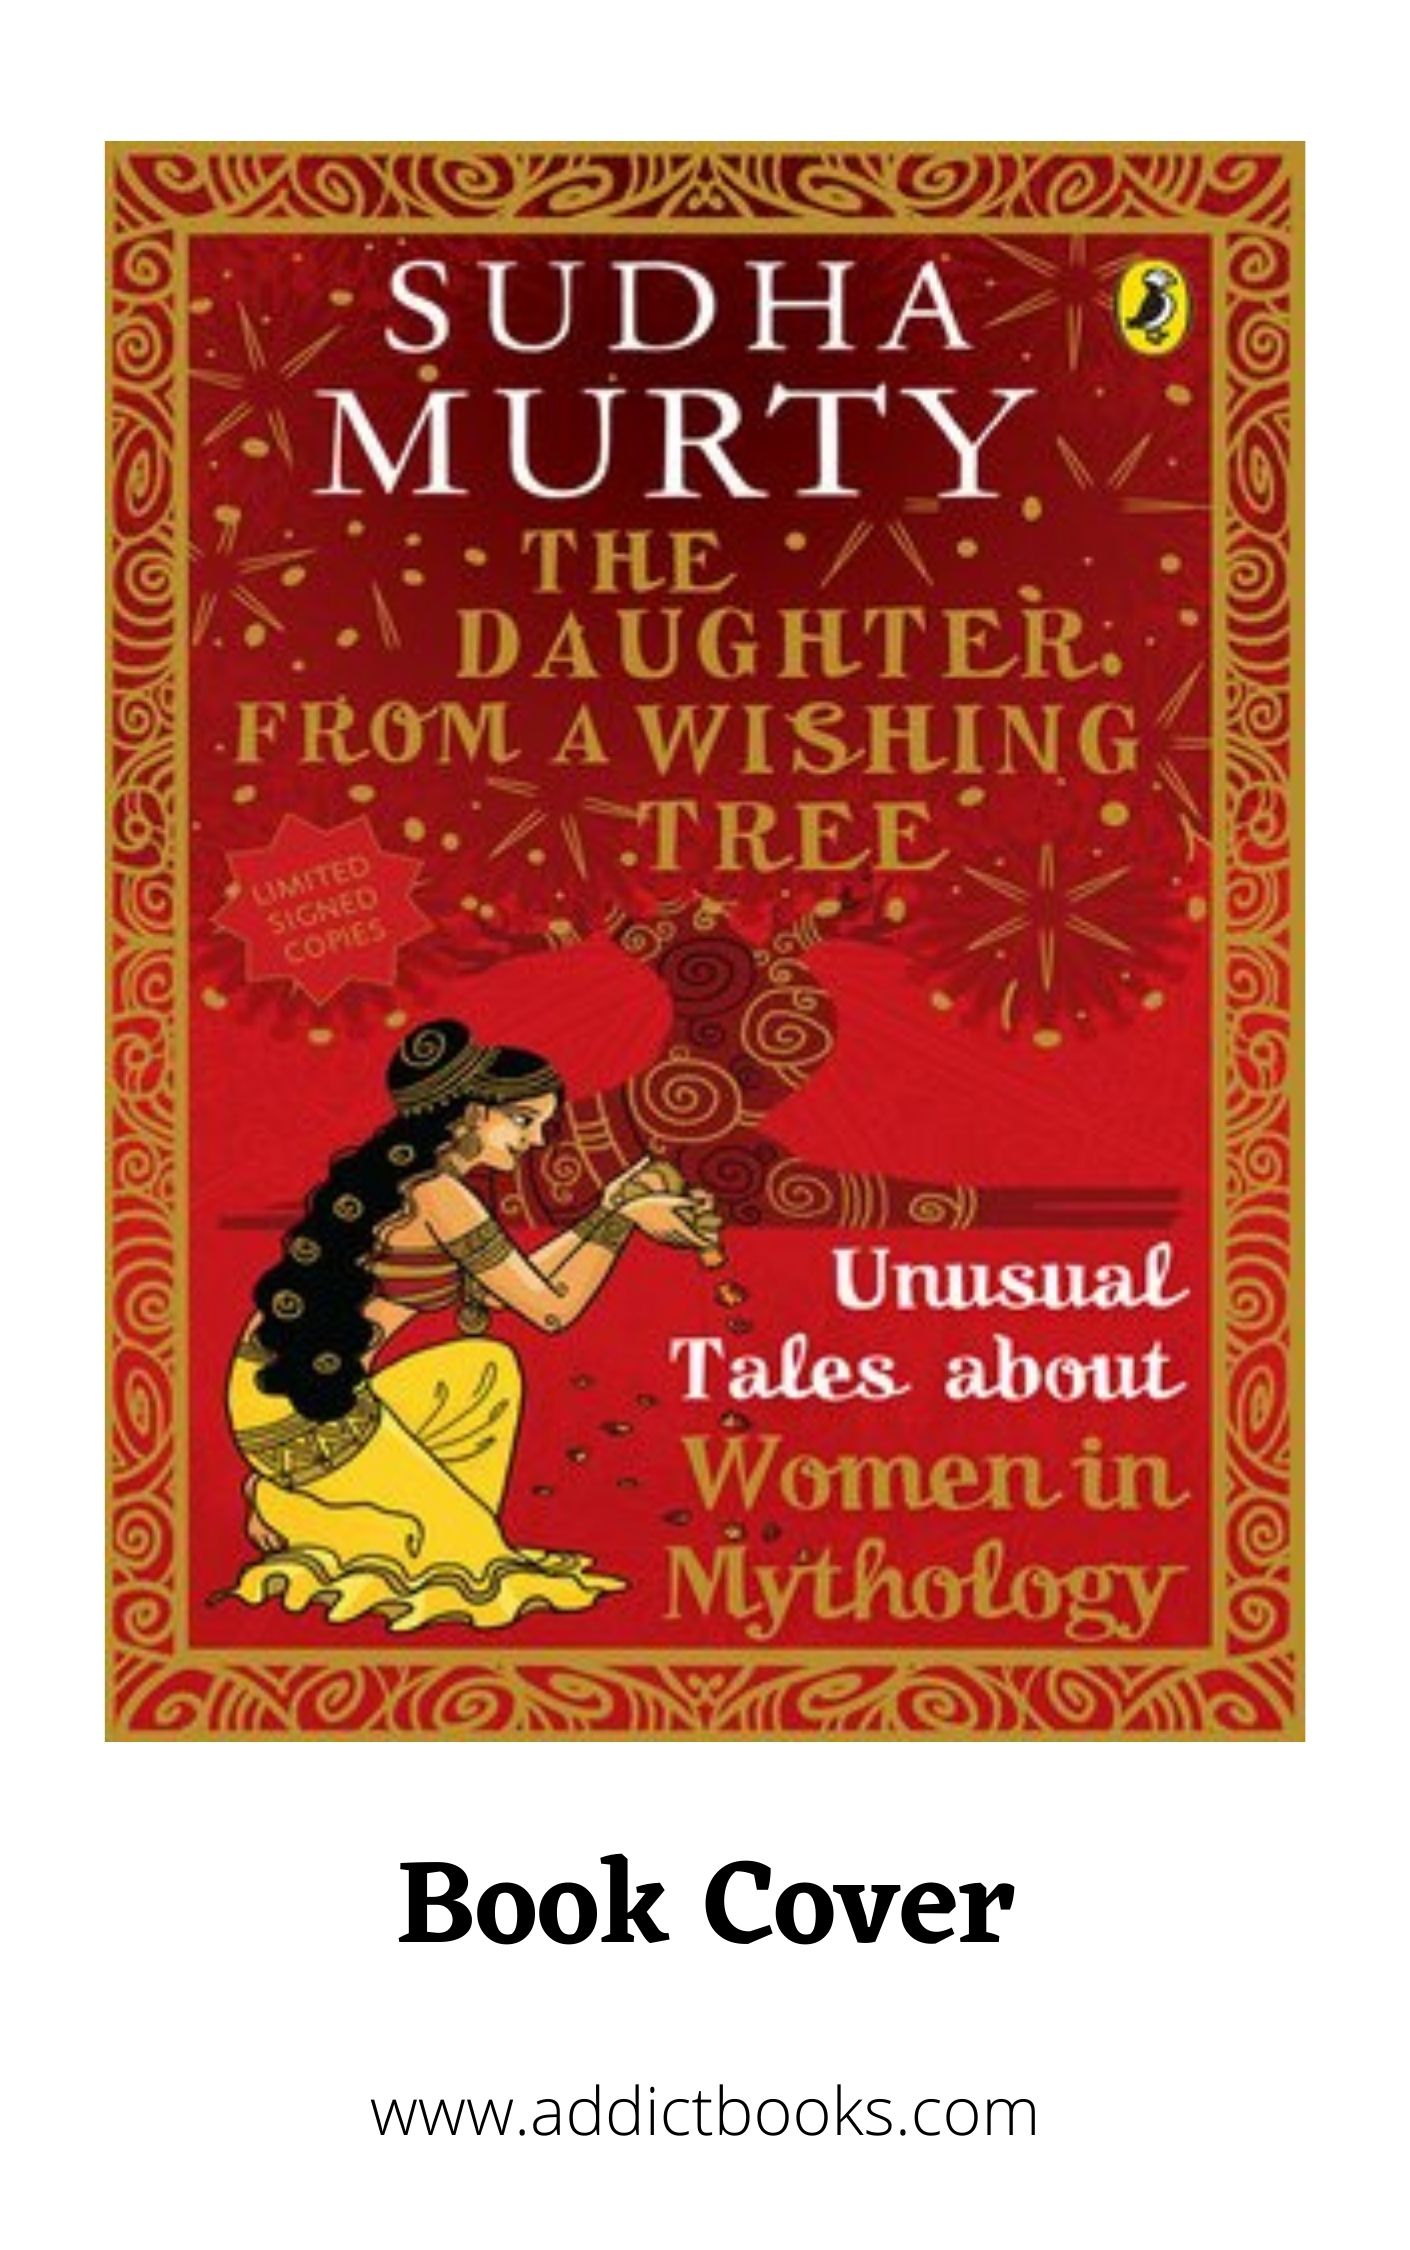 prepare book review on any work of sudha murthy